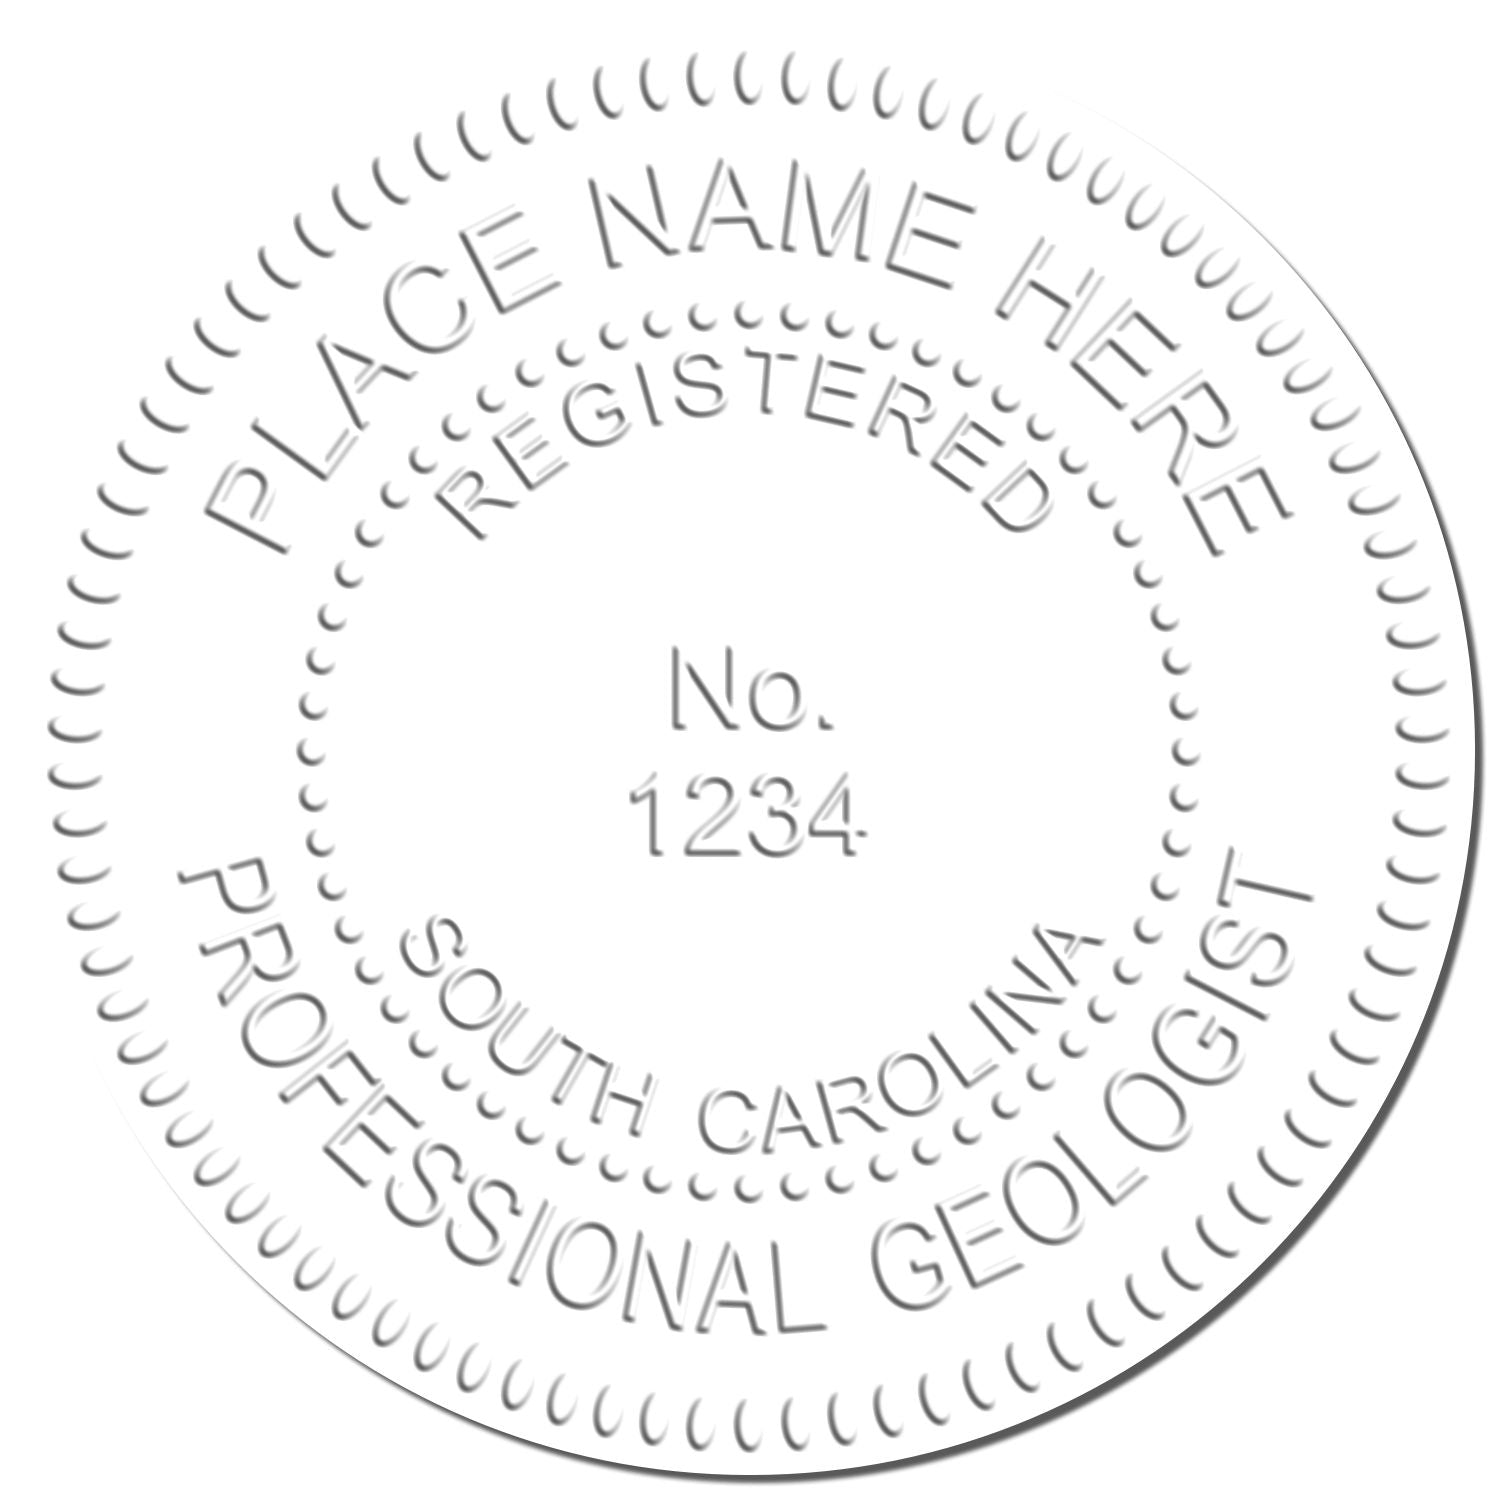 A photograph of the Hybrid South Carolina Geologist Seal stamp impression reveals a vivid, professional image of the on paper.